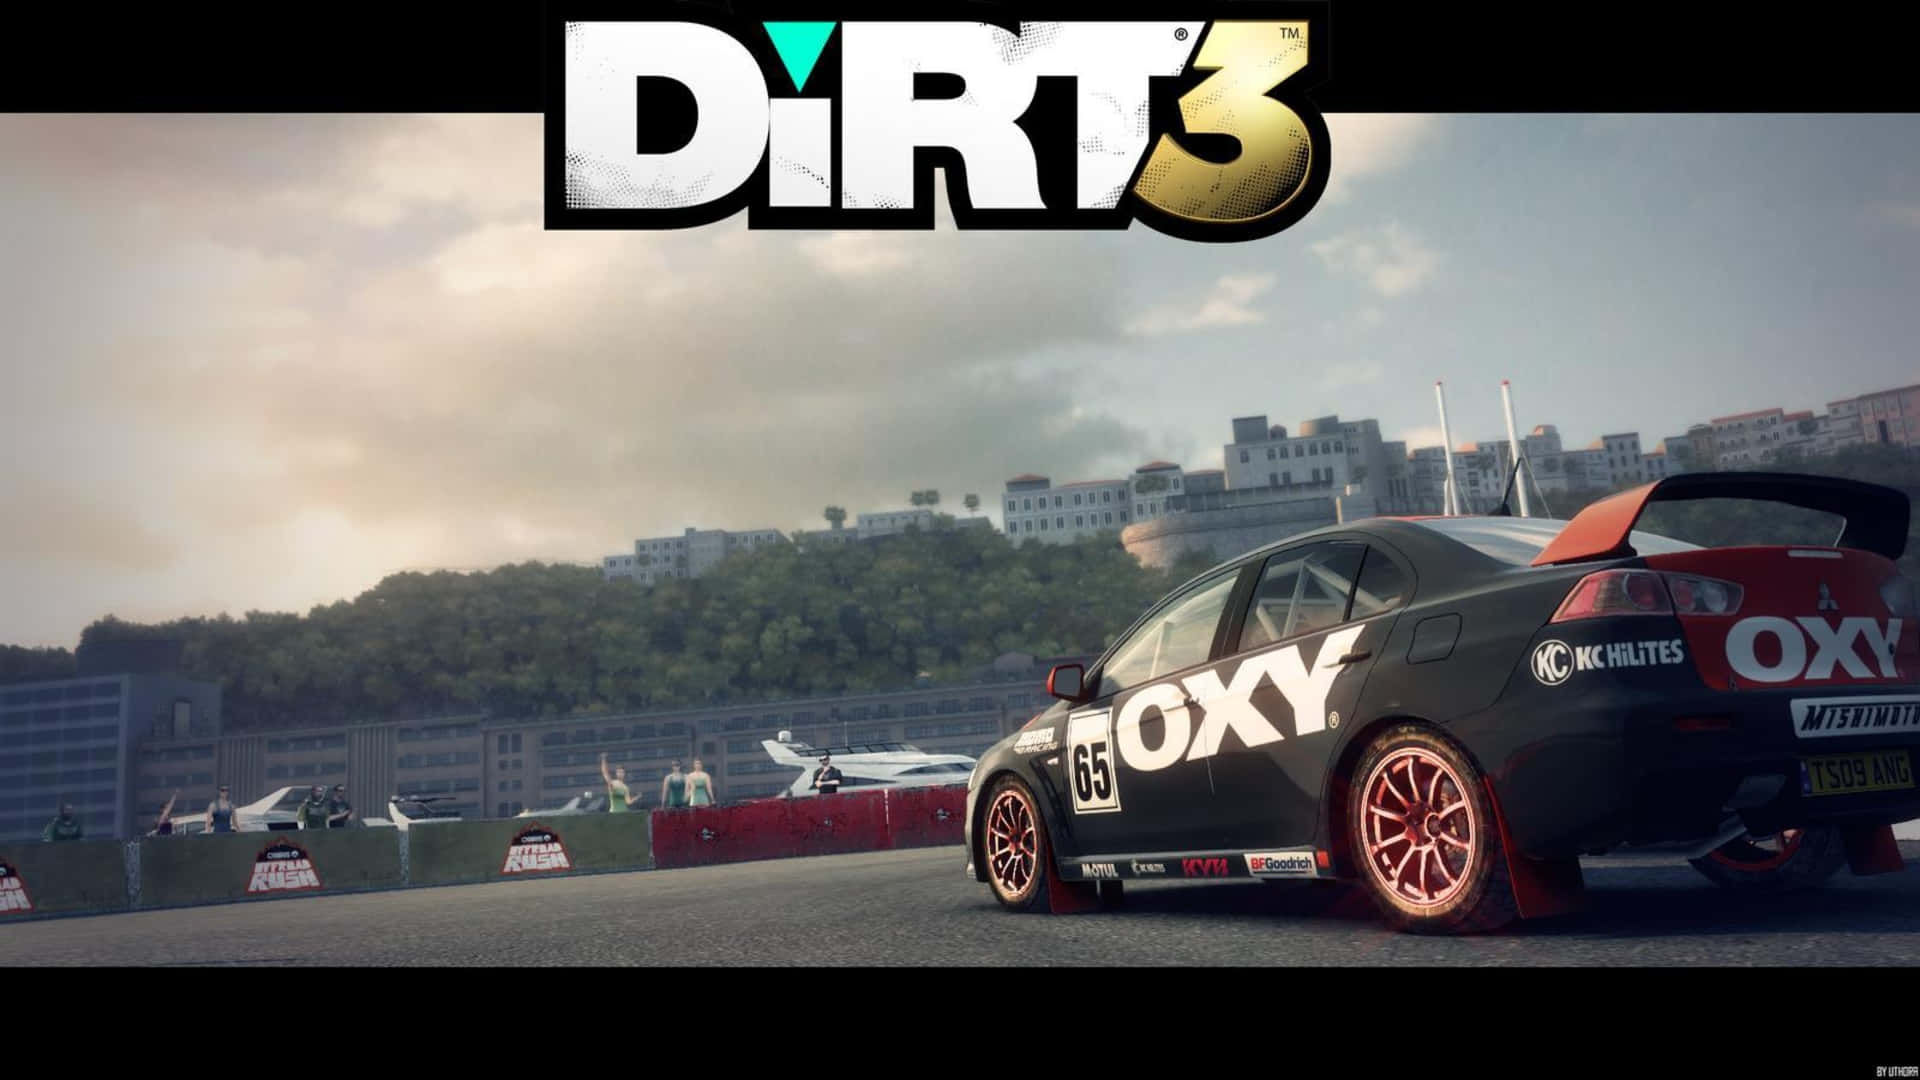 Take a ride into the unknown with the HD Dirt 3 experience!